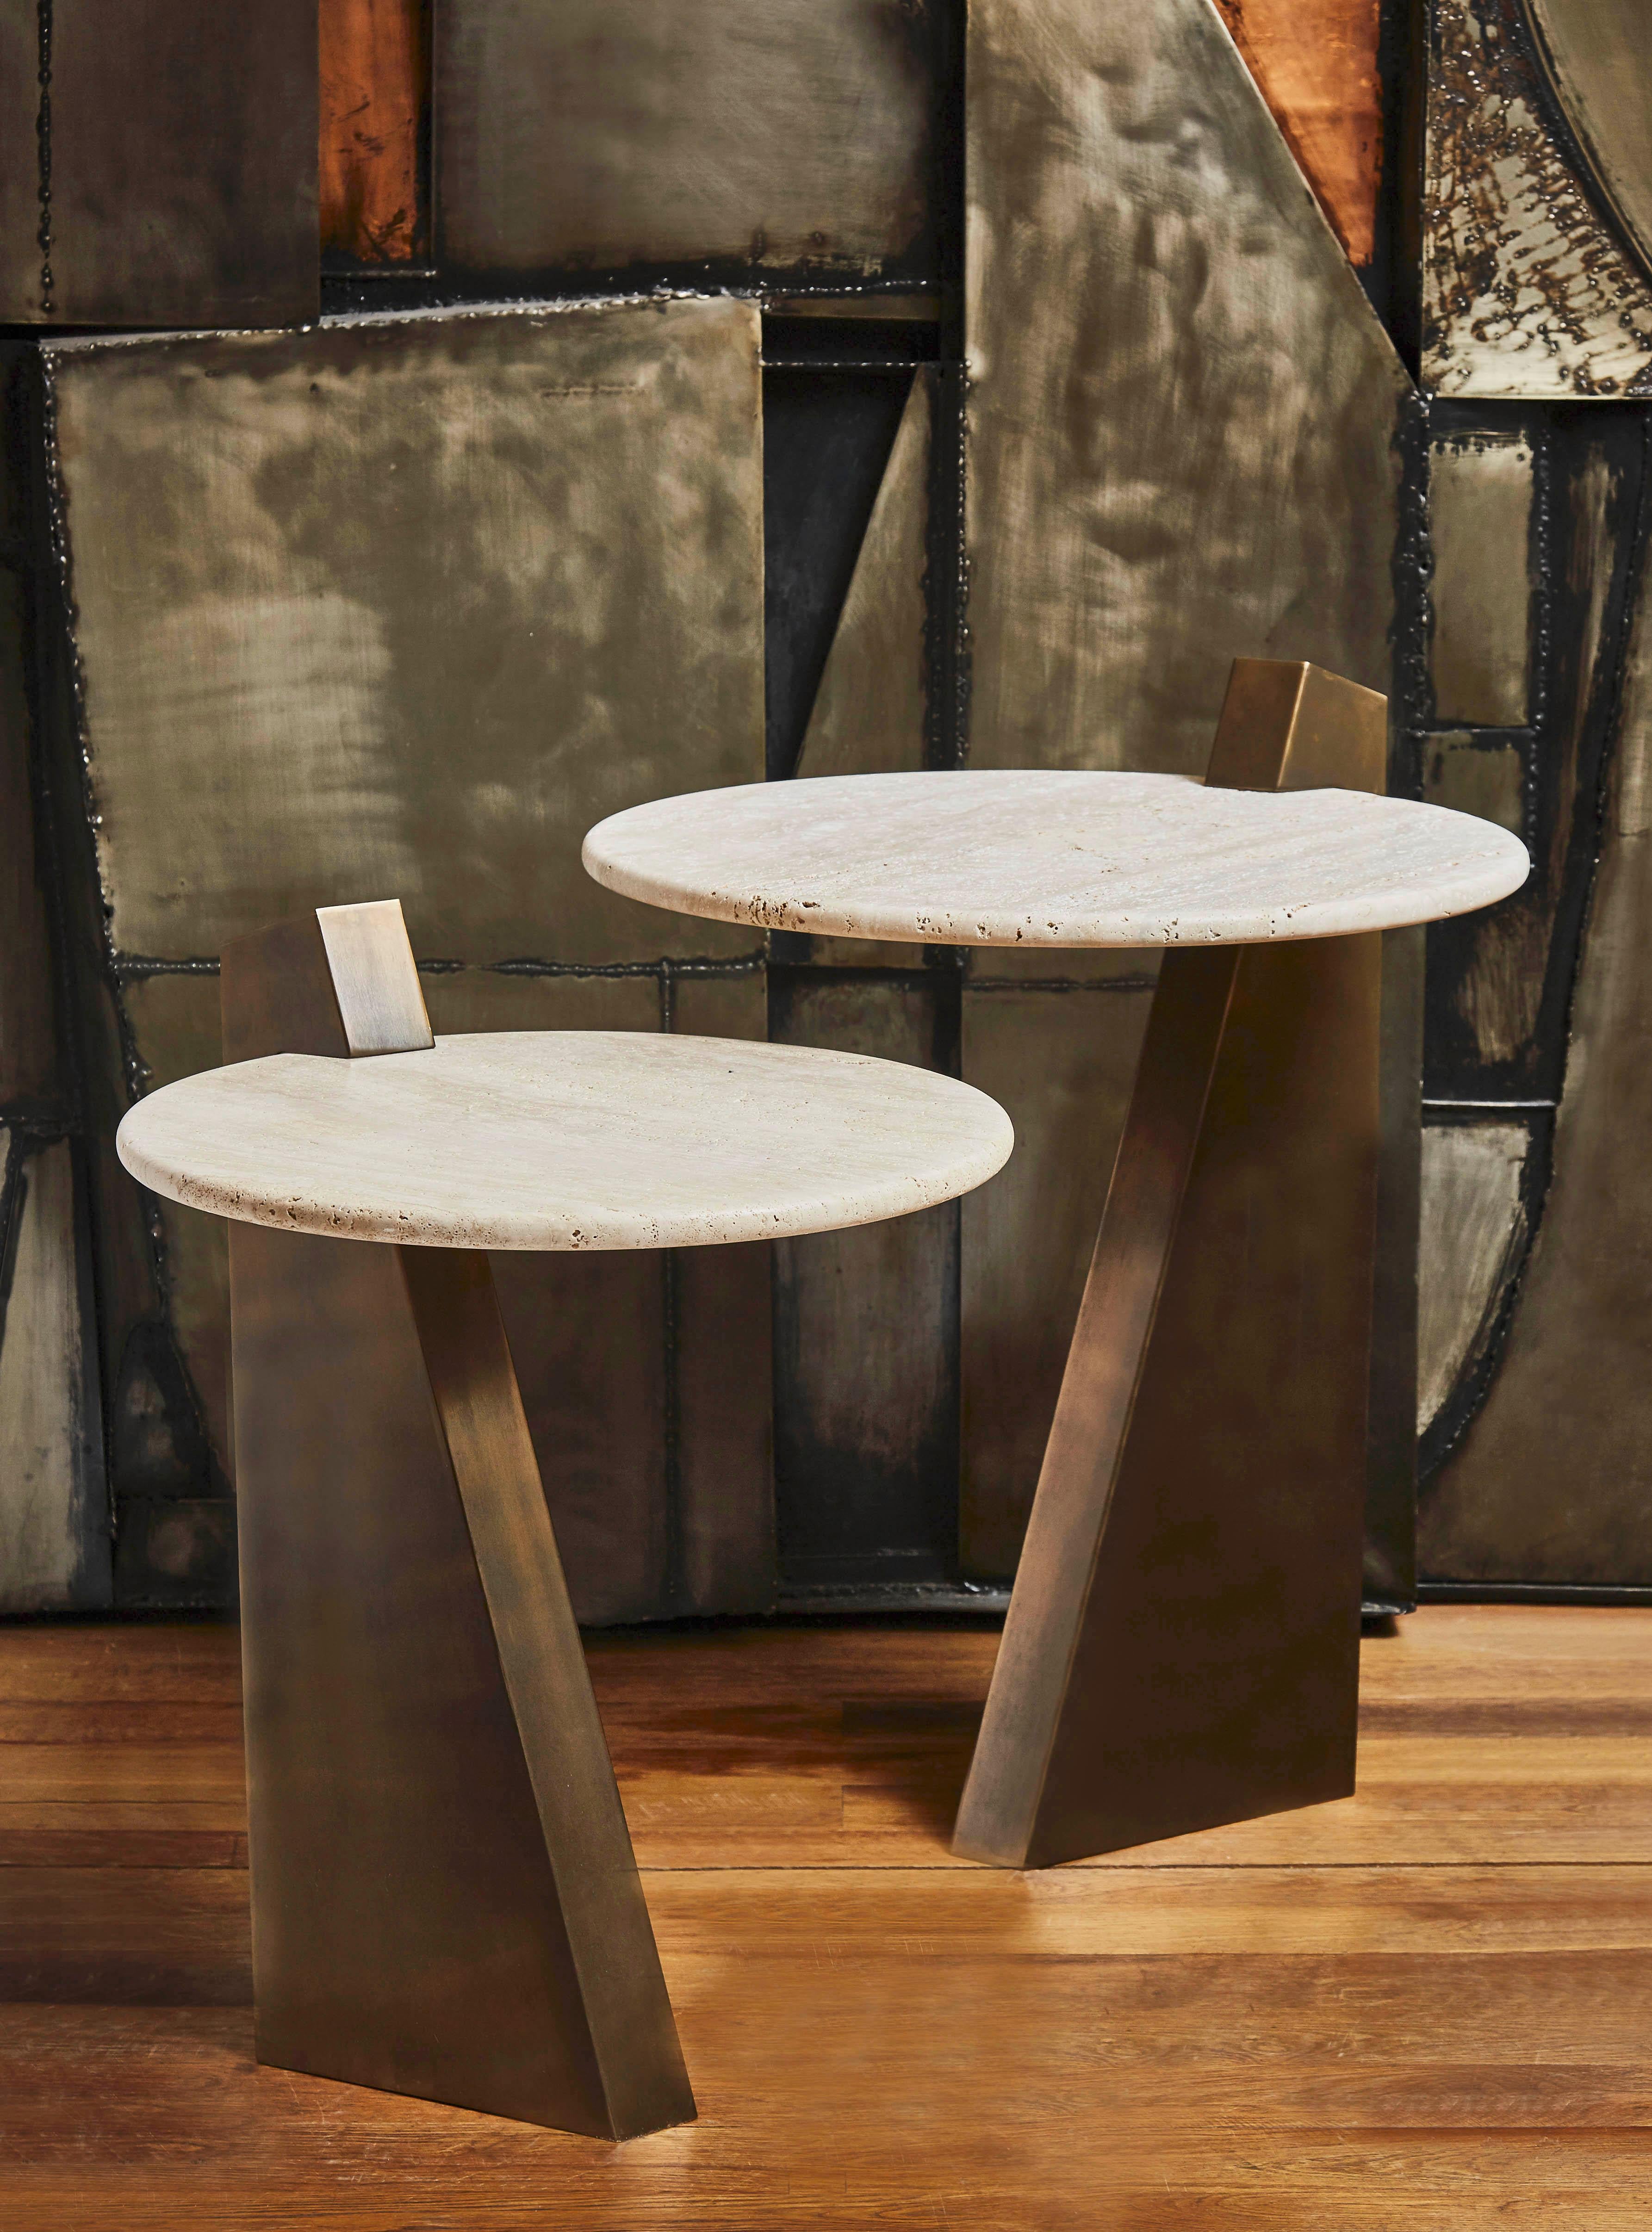 Pair of pedestal tables in patinated brass with a travertine top. Creation by Studio Glustin.
Brass finishes and stone top customizable.
(Can be sold separately)
Measures: Diameter 55 x height 61 cm
Diameter 45 x height 53 cm.